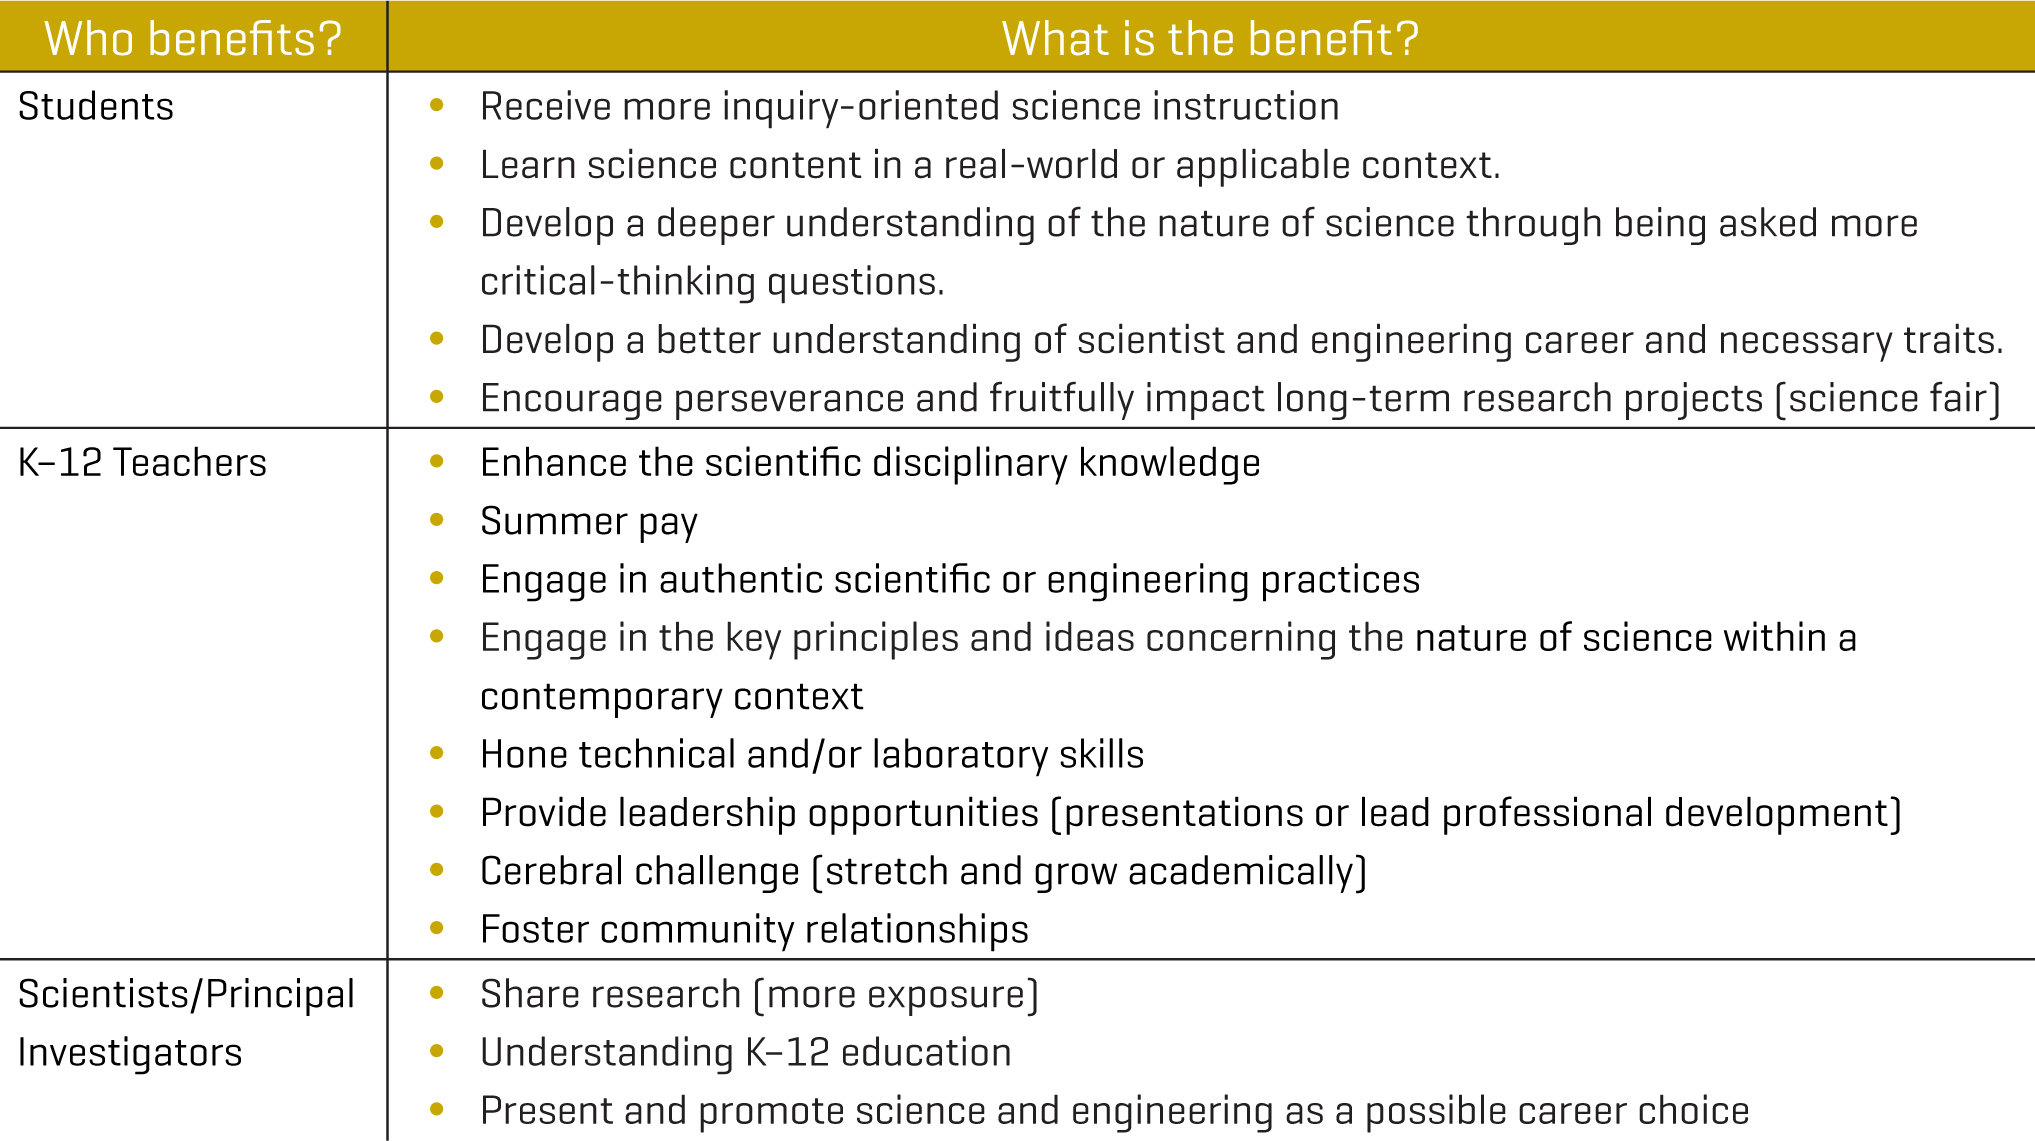 Outline of possible benefits that could transpire from participating in RET programs